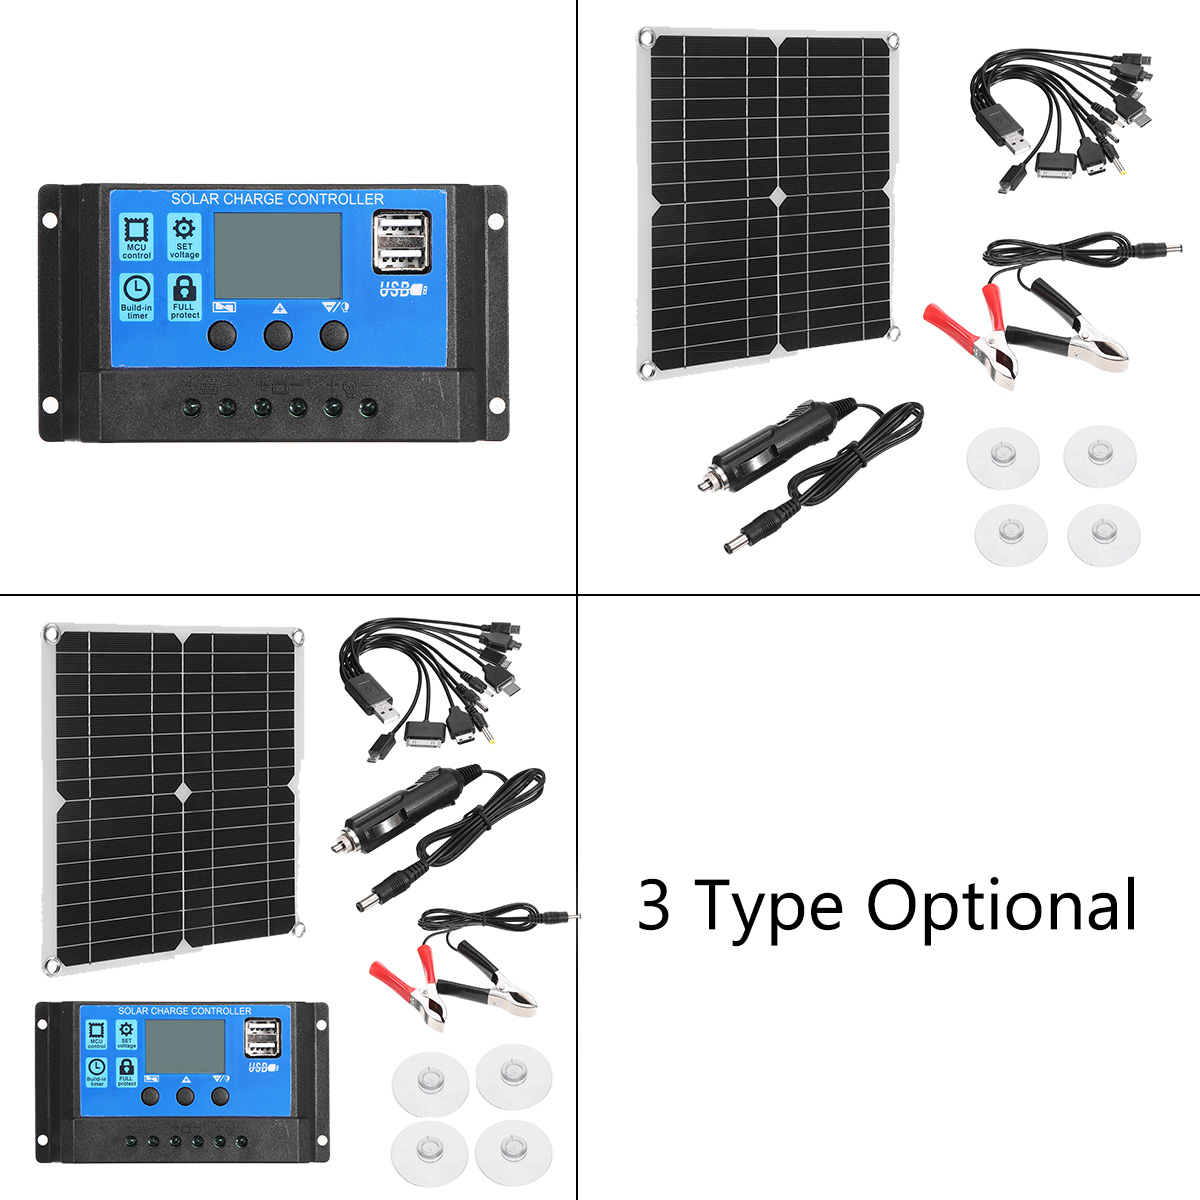 40W-Portable-Solar-Panel-Kit-Battery-Charger-Controller-Waterproof-For-Camping-Traveling-1830191-9